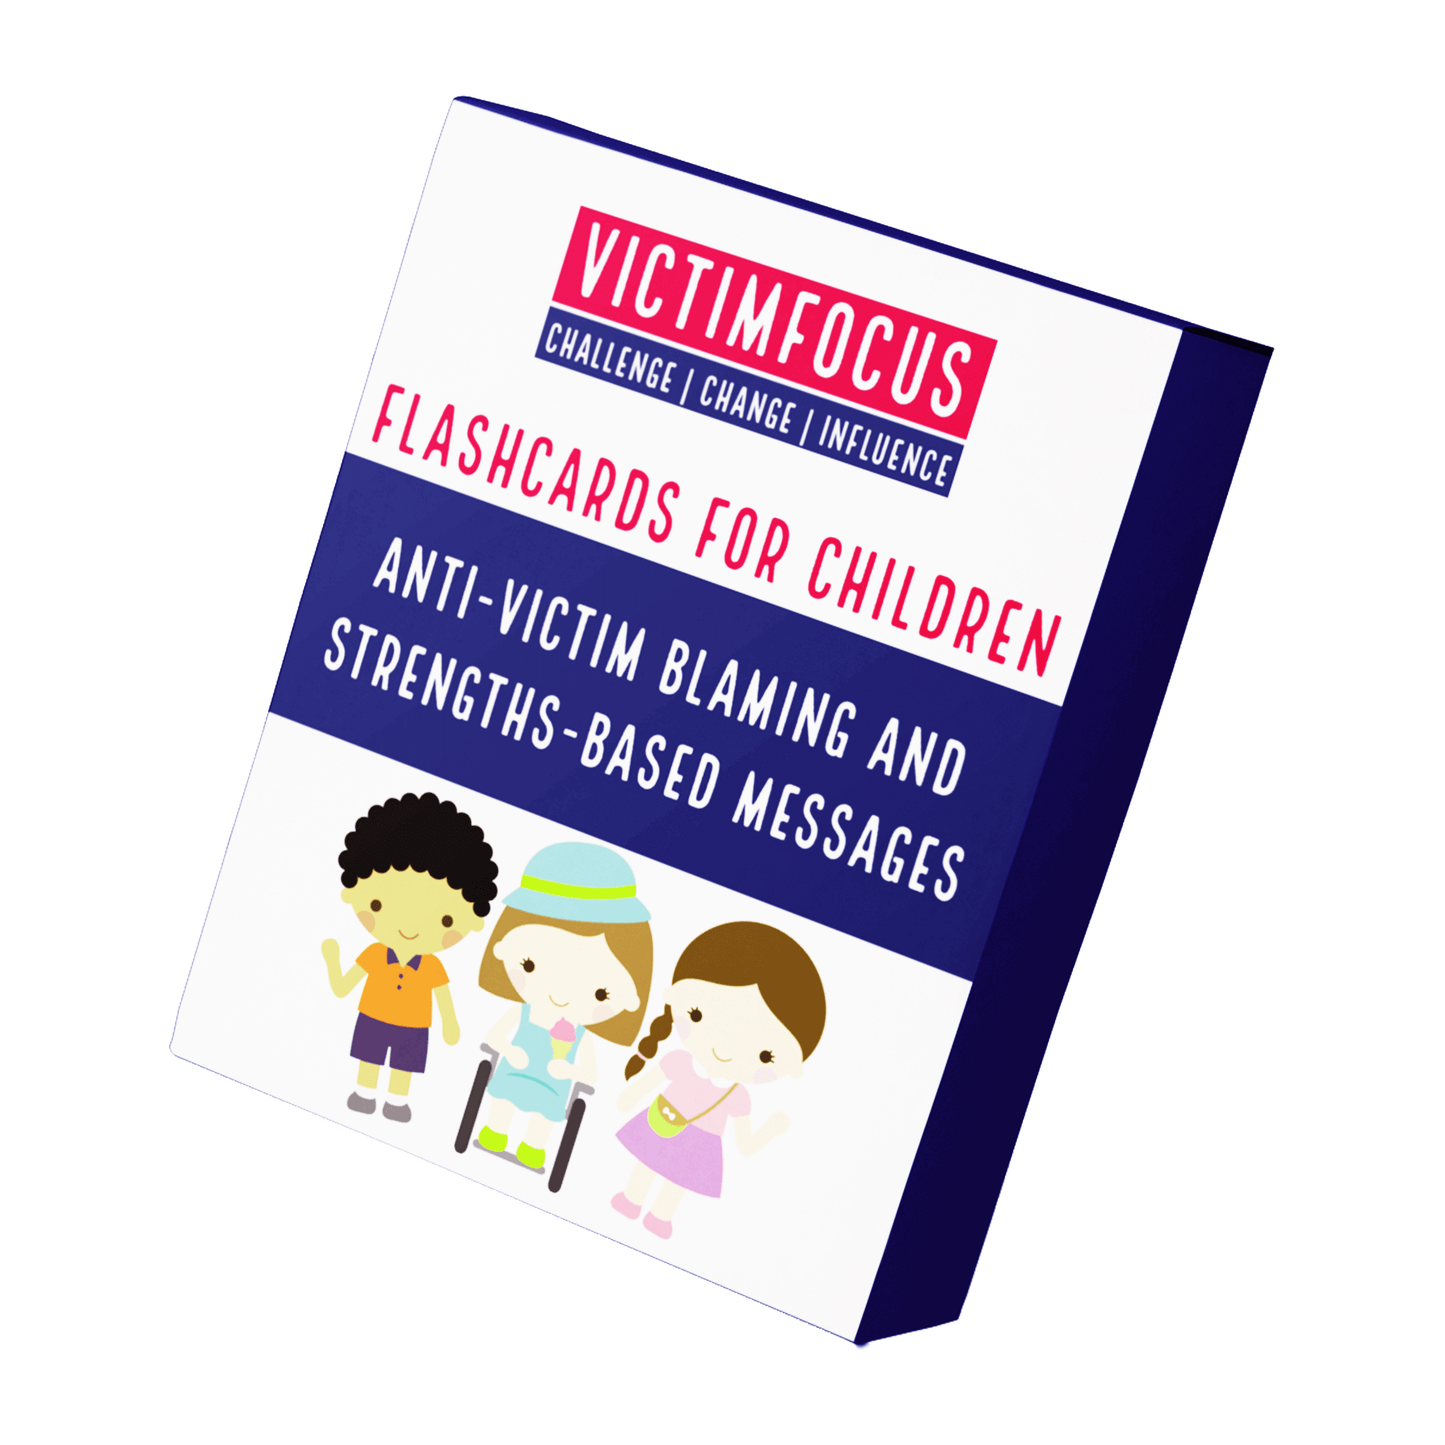 Flashcards for Children: Anti-Victim Blaming and Strengths-Based Messages